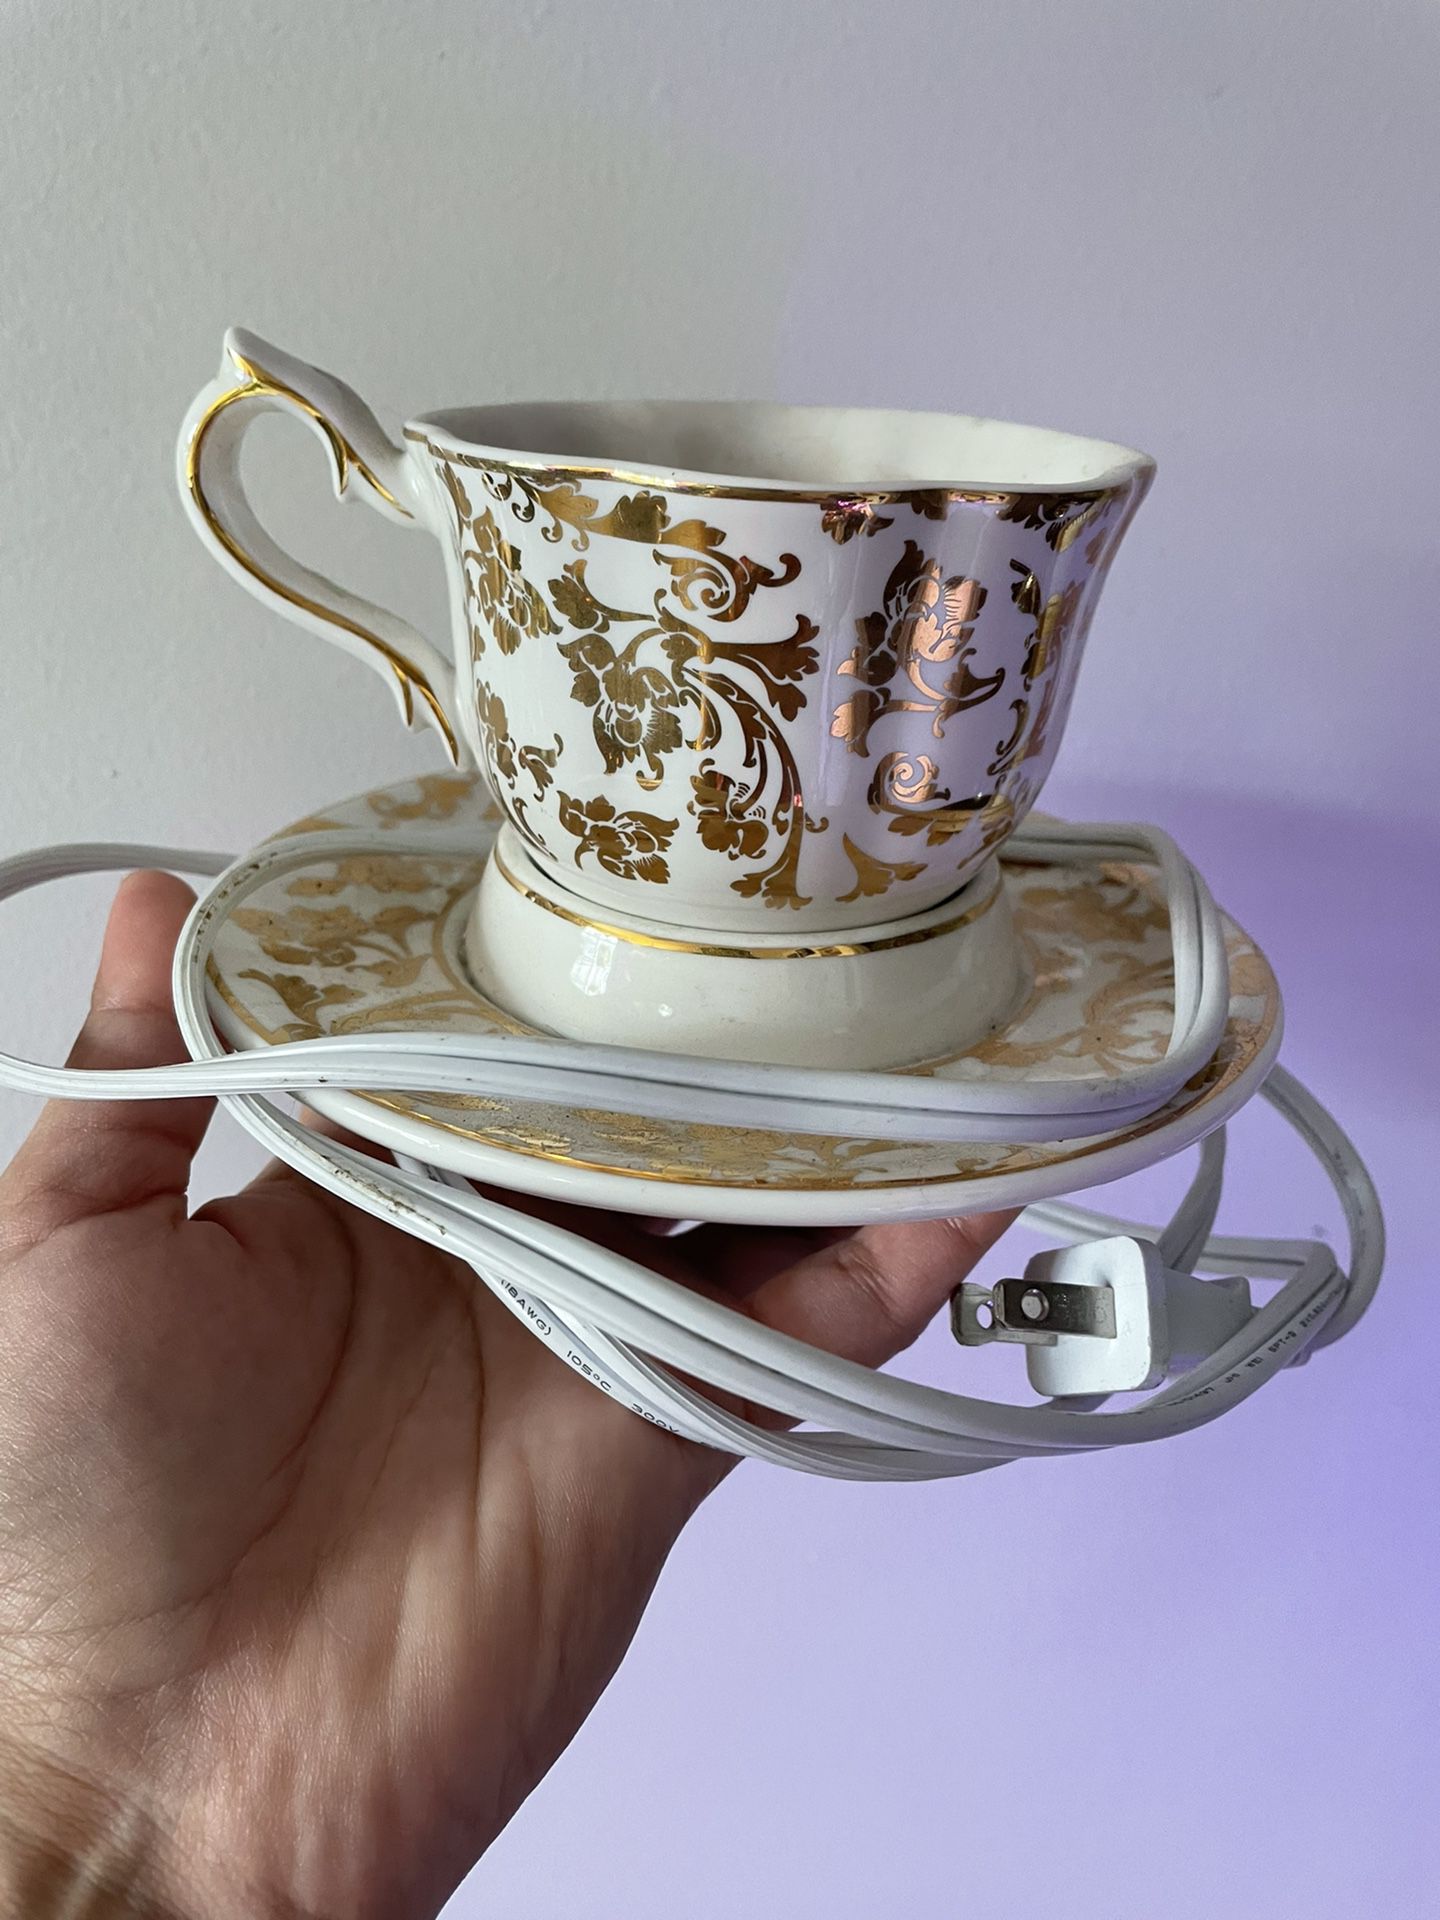 Scentsy Teacup Warmer